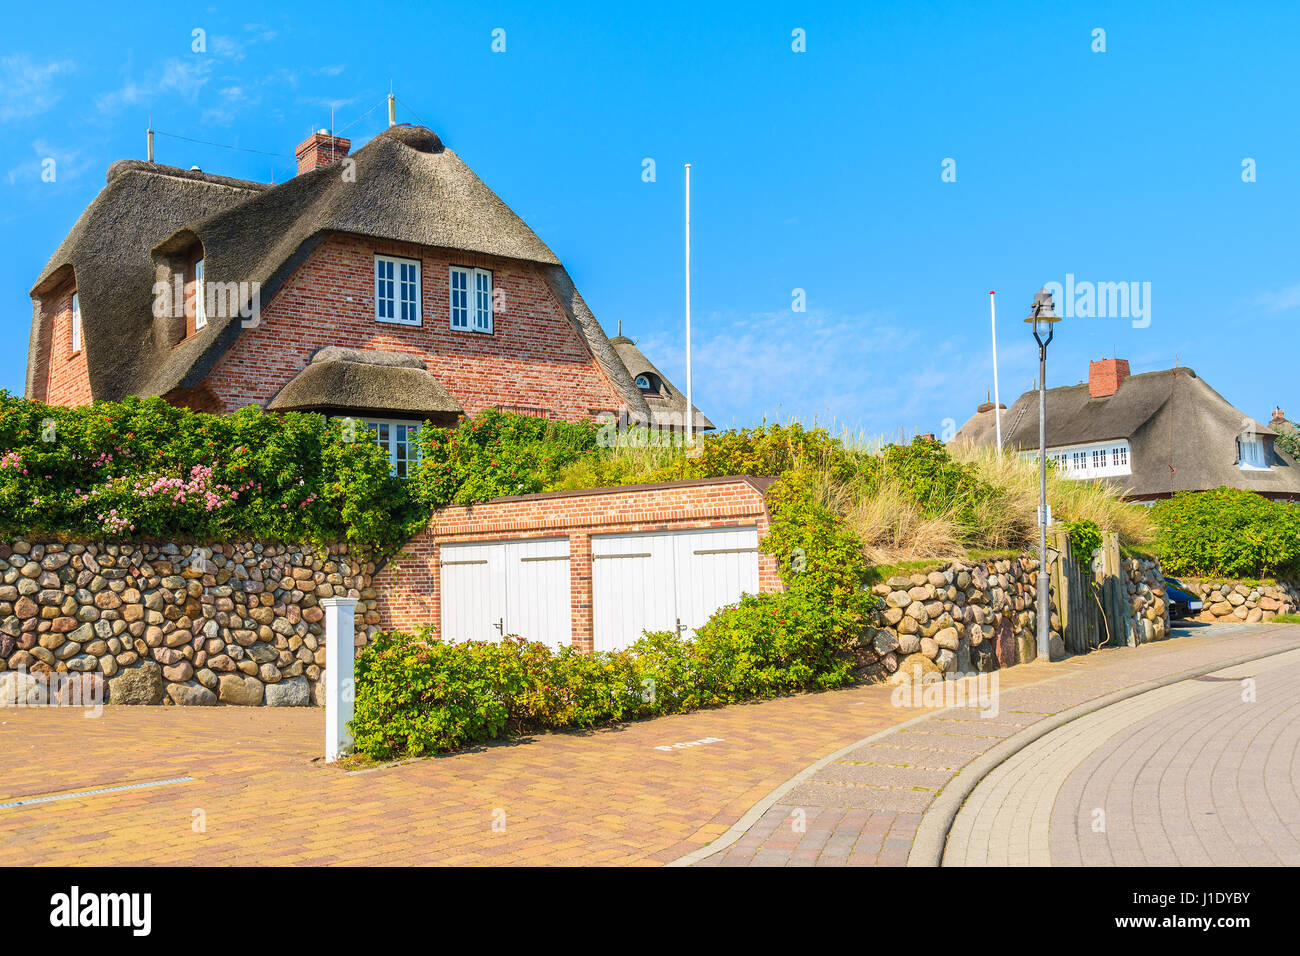 Stree and typical red brick houses with straw roofs in Rantum village, Sylt island, Germany Stock Photo